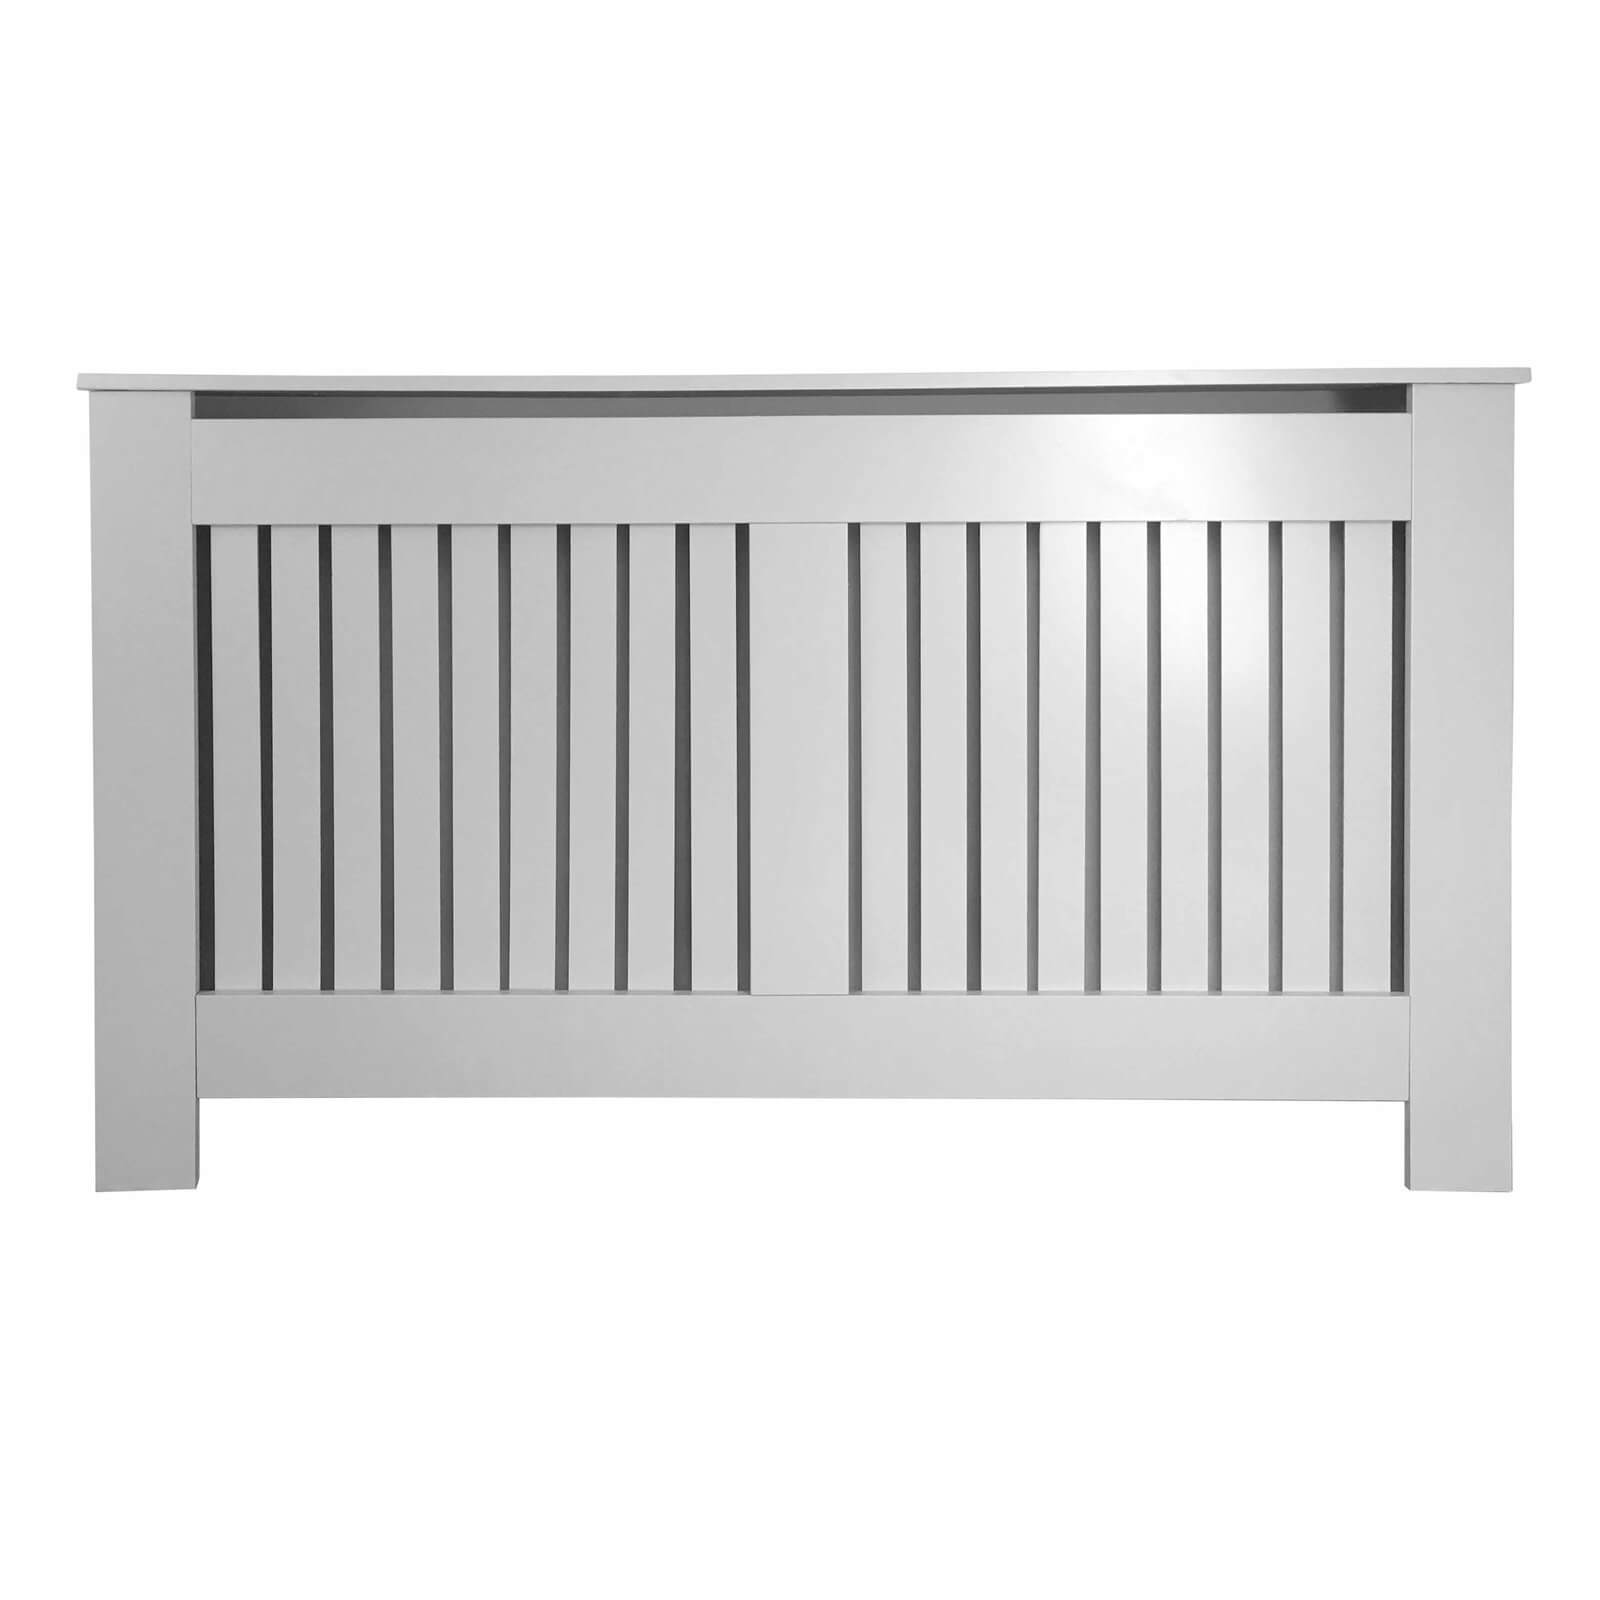 Radiator Cover with Vertical Slatted Design in Grey - Large